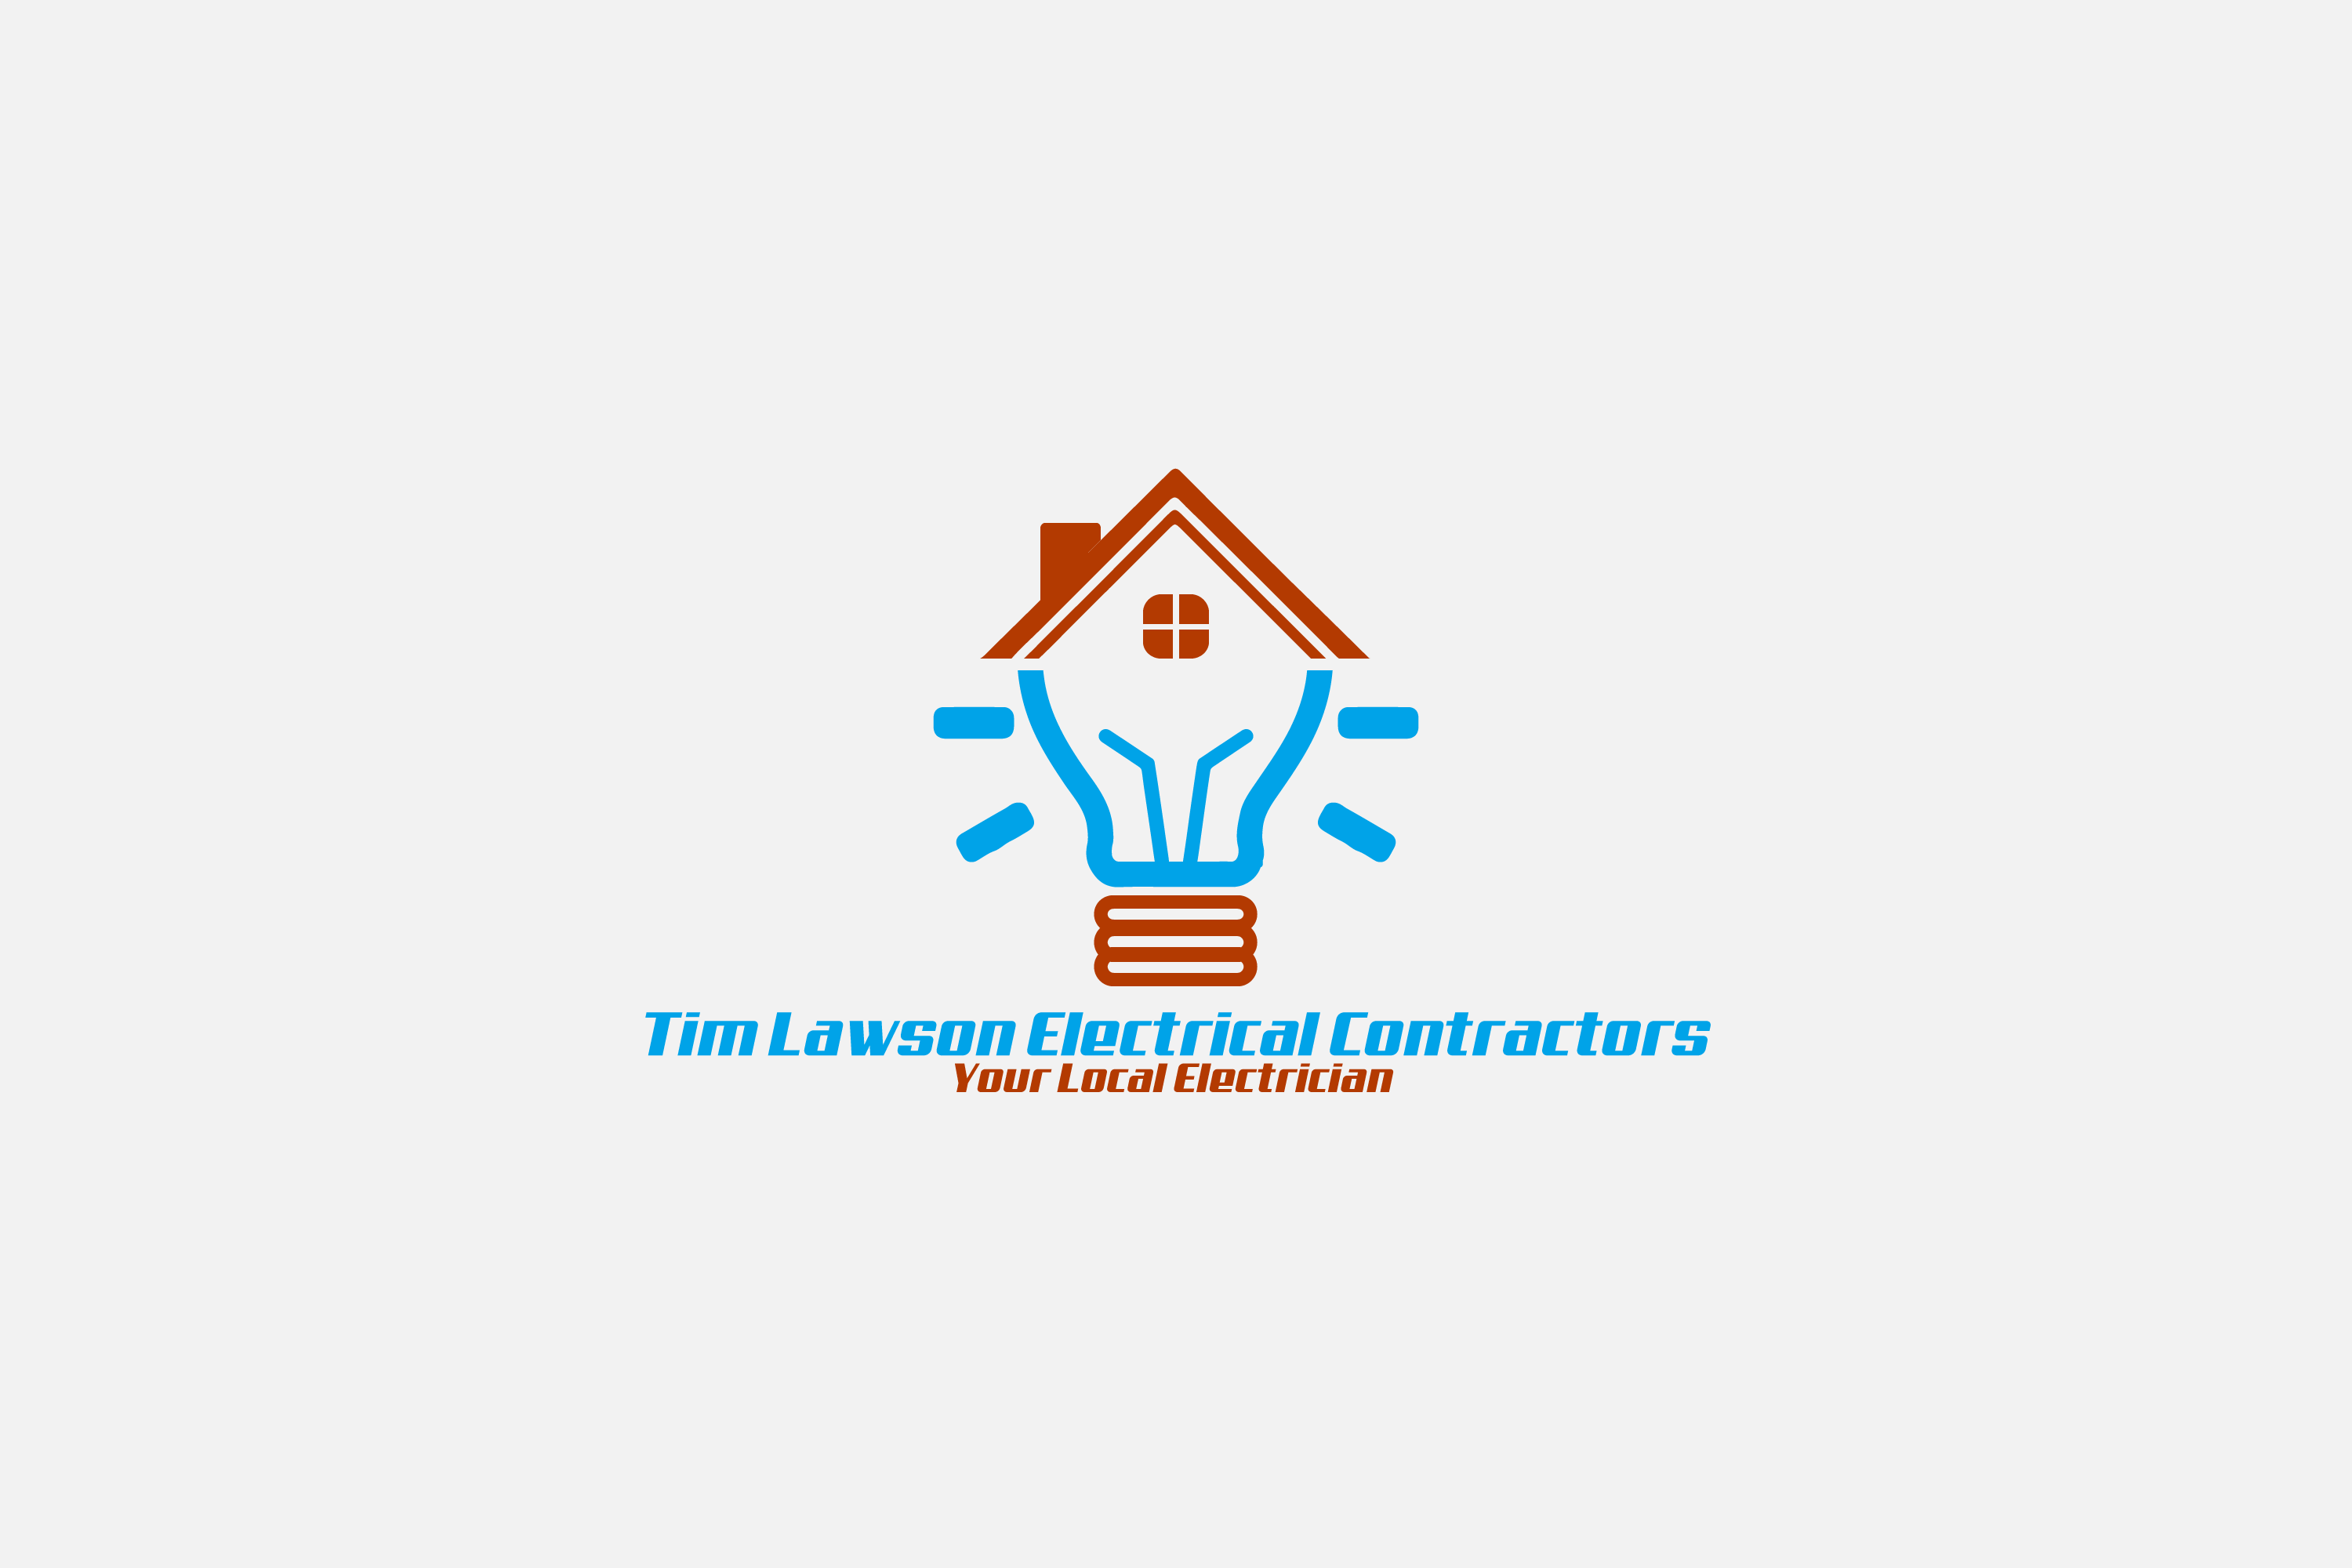 Tim Lawson Electrical Contractors